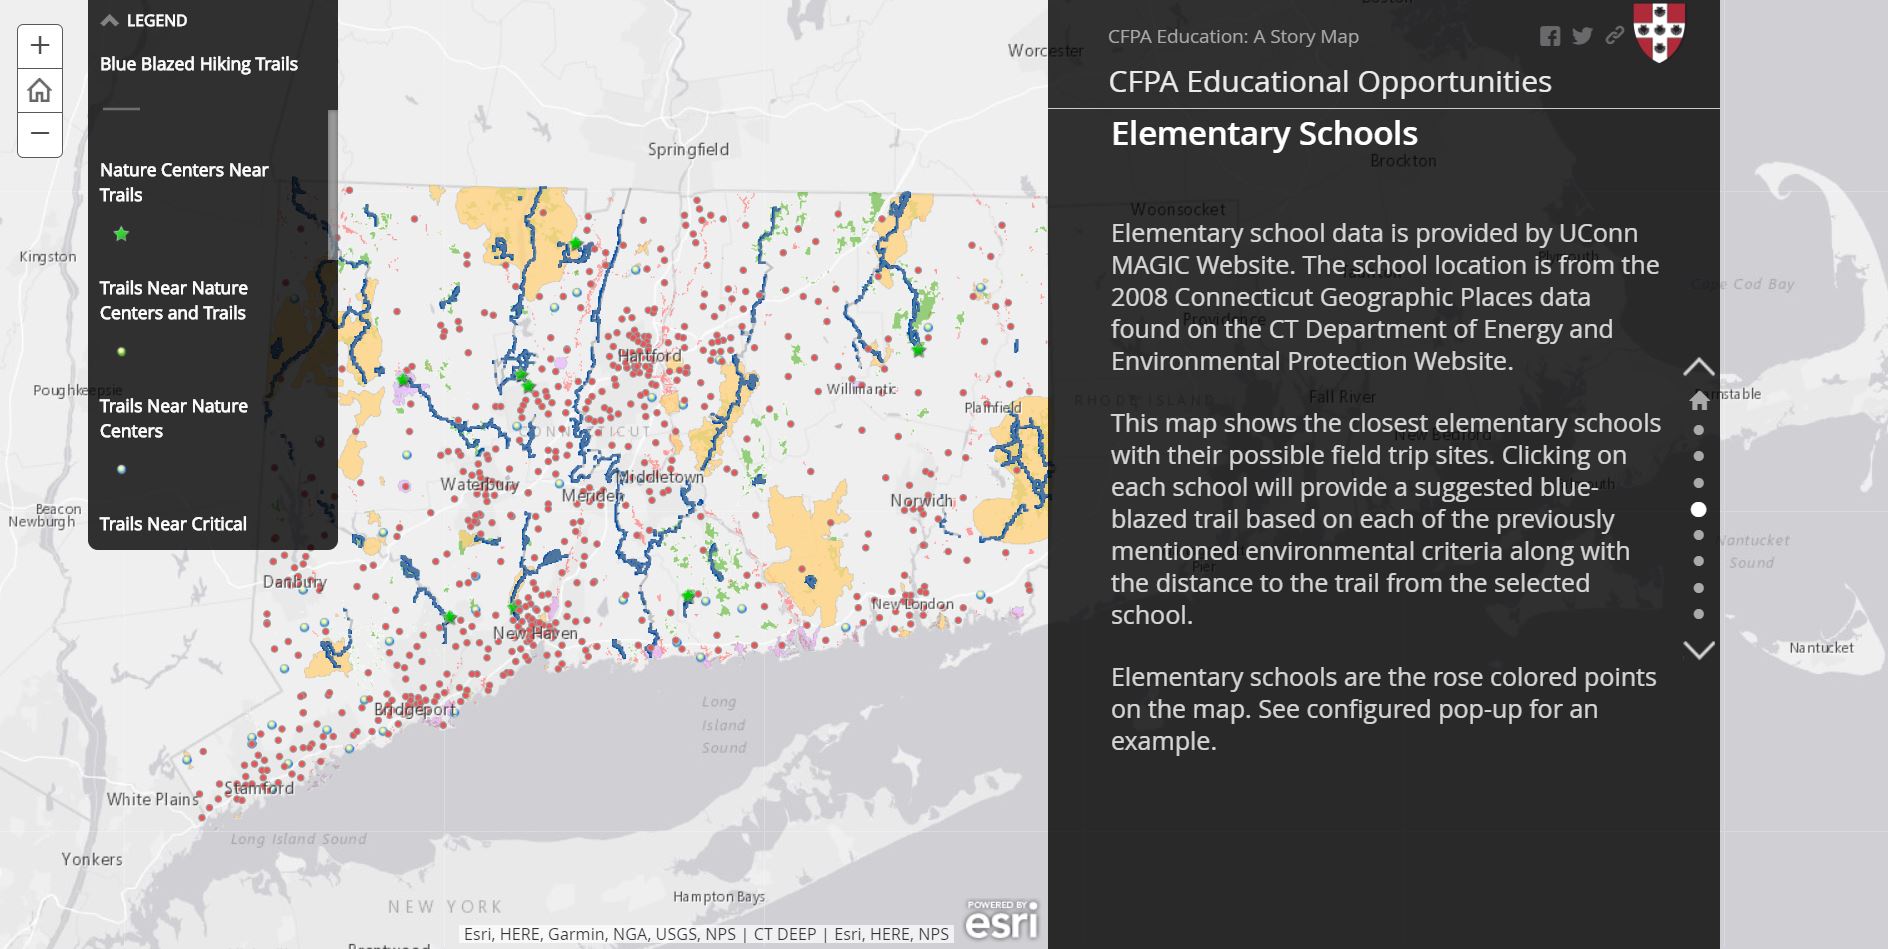 The education group created a Story Map titled "CFPA Educational Opportunities." The map shows locations of elementary schools throughout the State of Connecticut that are close to a blue-blazed trail. The trail could serve as a possible field trip site. Group members included Tyler Barnes ’18, Sara Bennett ’18, Mariel Hohmann ’18, Sage Loomis ’18 and Paul Franceschi ’19.